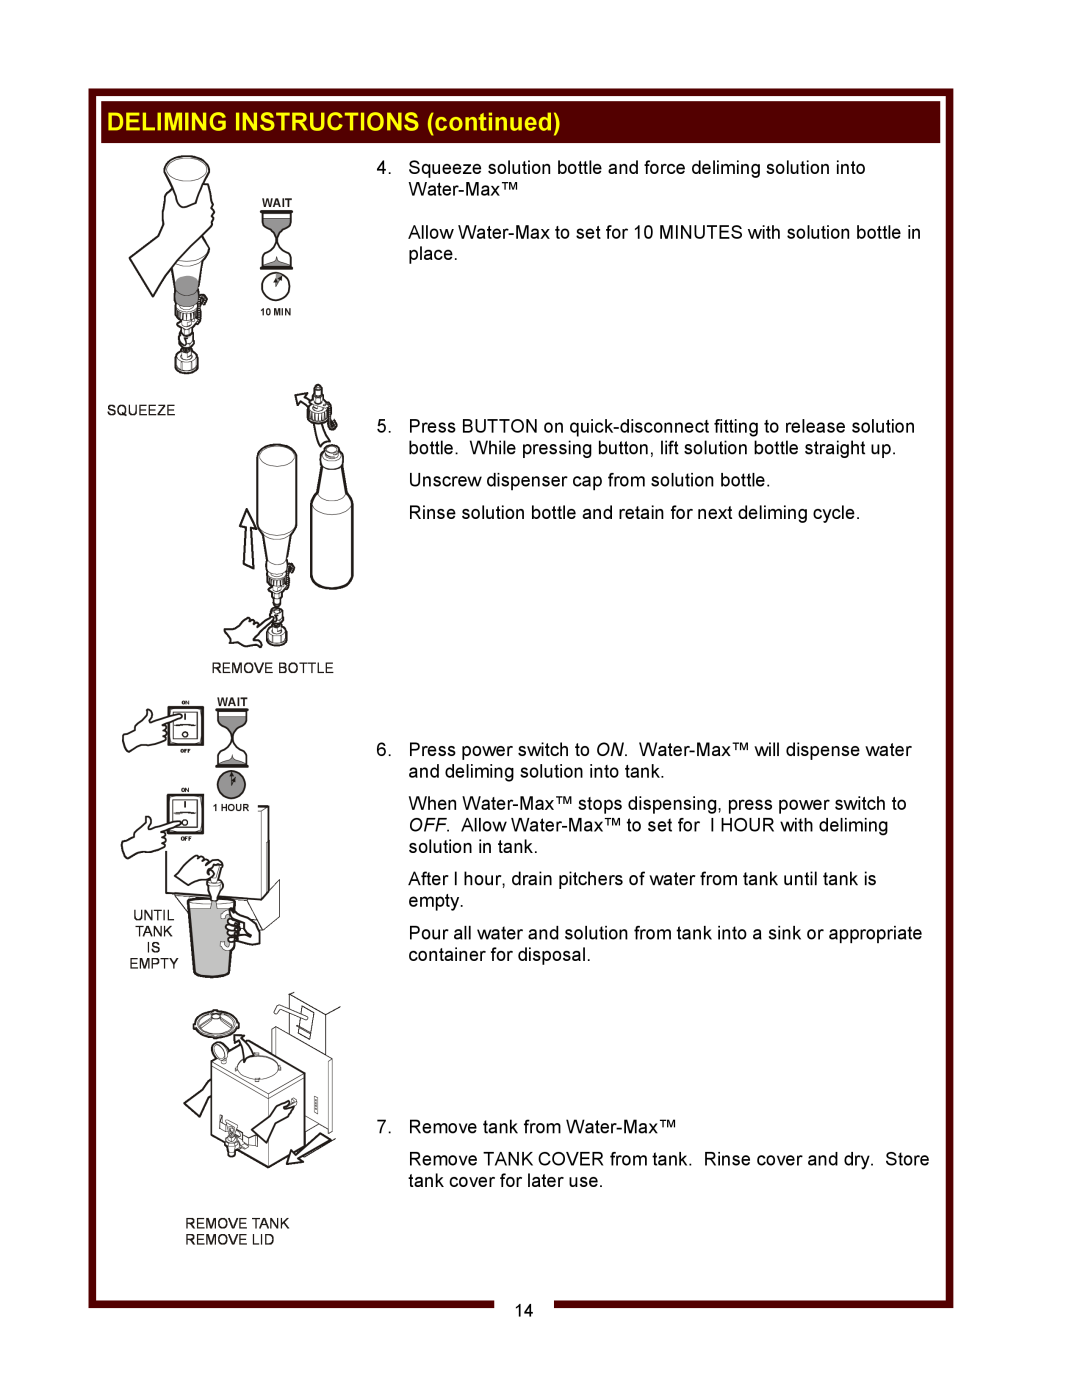 Wells WM-TR operation manual DELIMING INSTRUCTIONS continued 